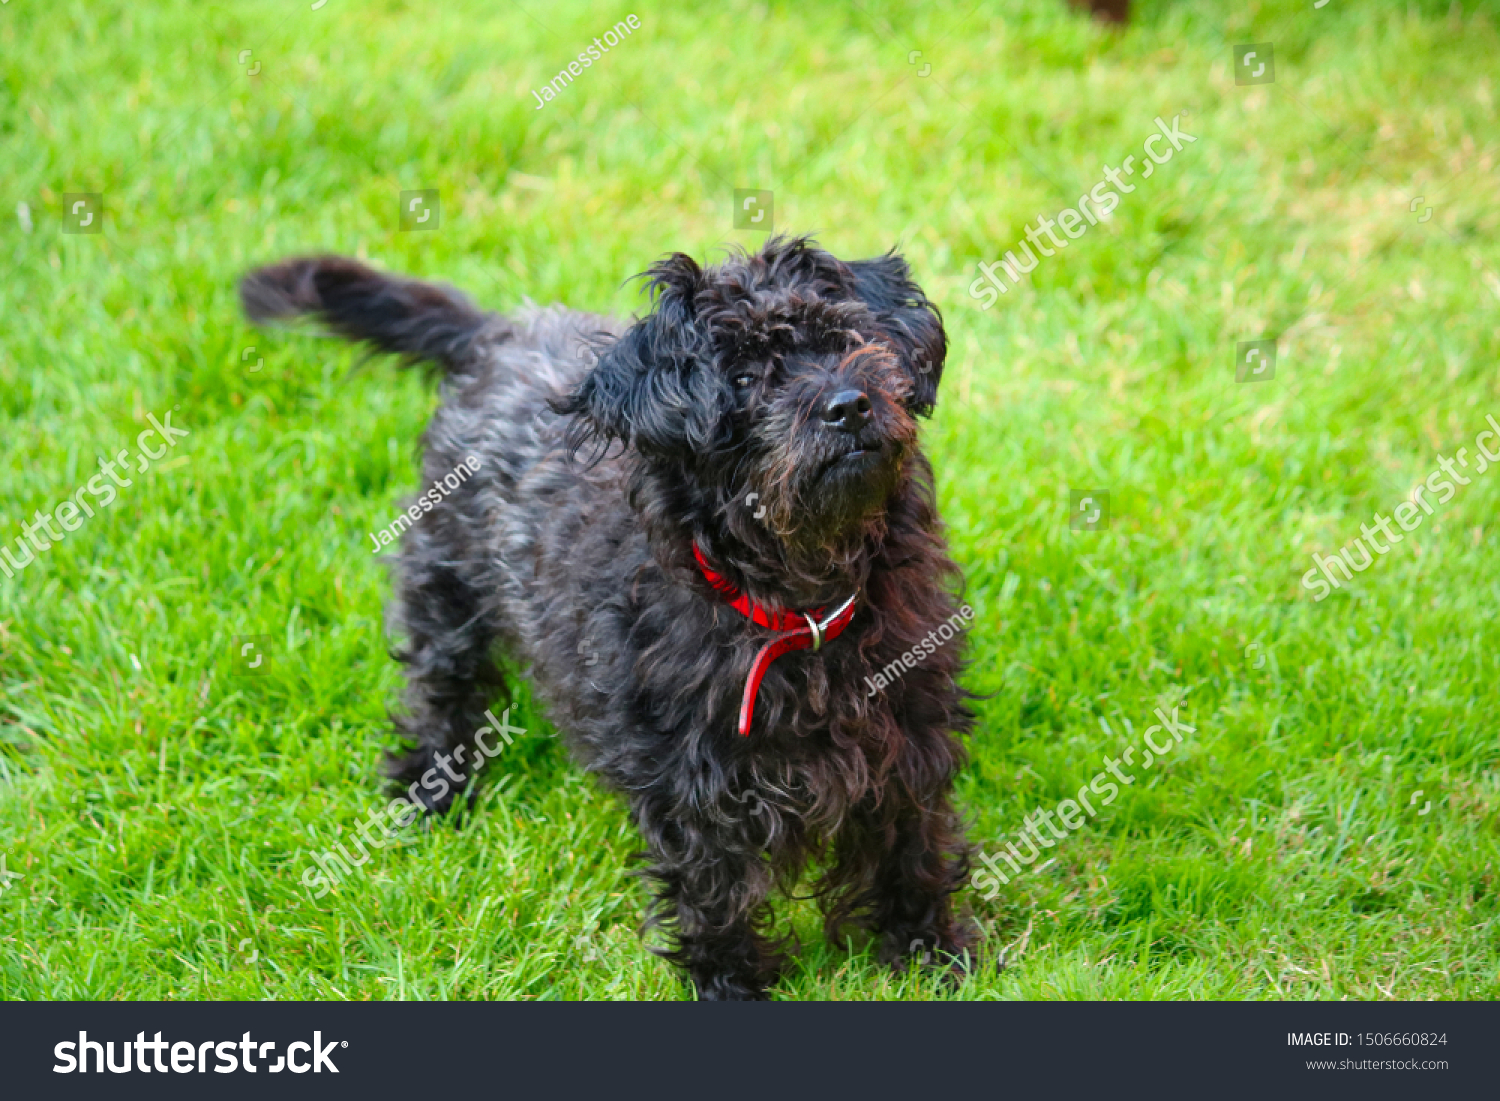 Small Toy Poodle Cross Norfolk Terrier Stock Photo Edit Now